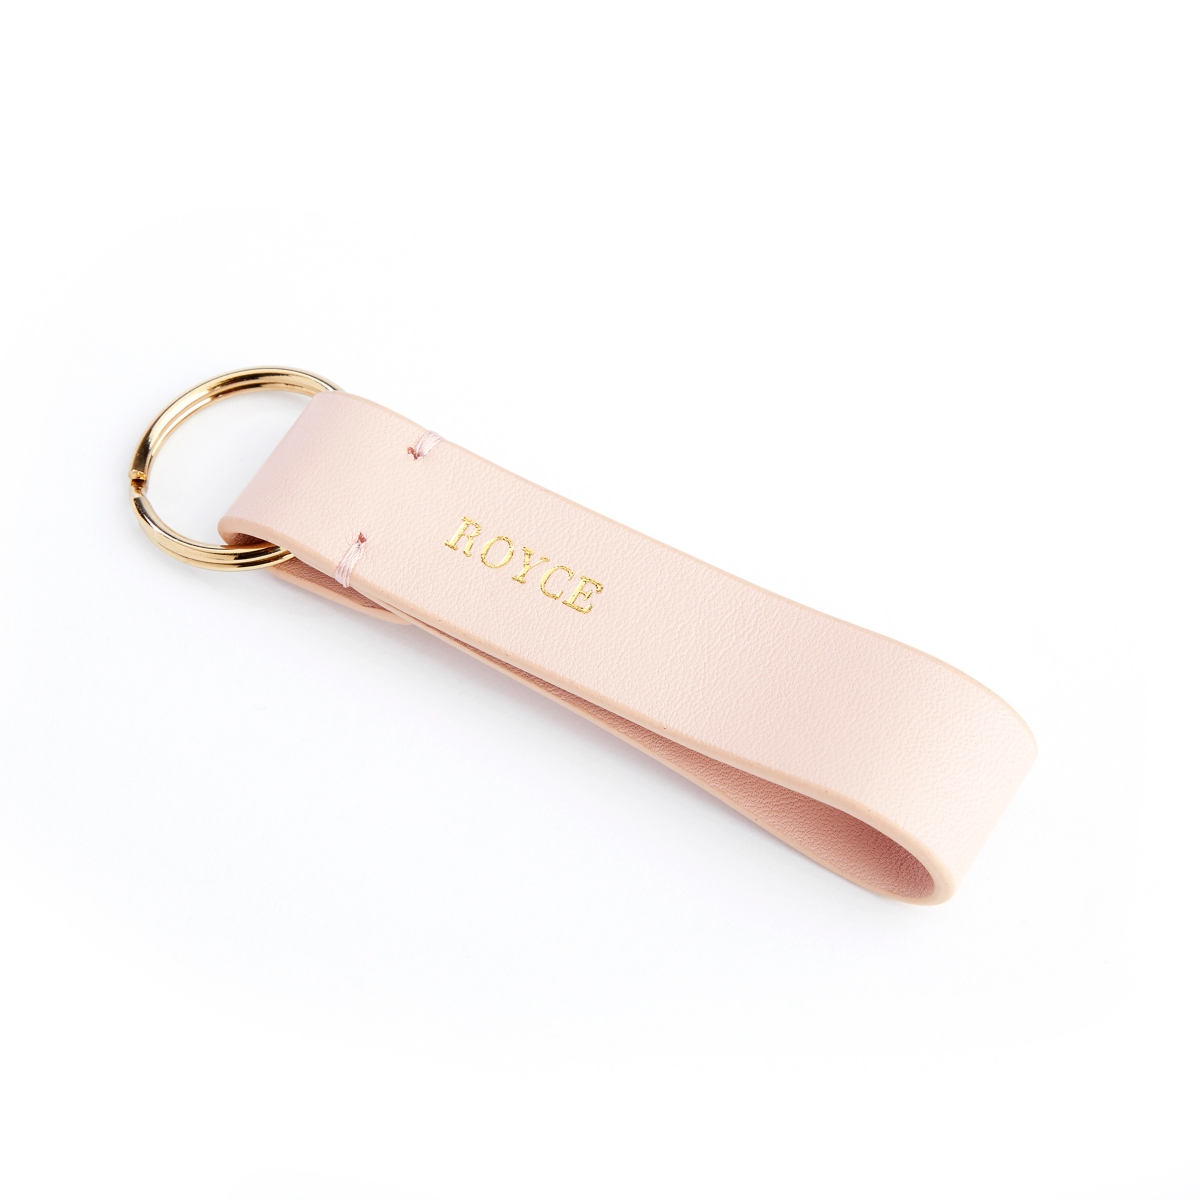 Leather Loop Key Fob with Gold Hardware - Light Pink